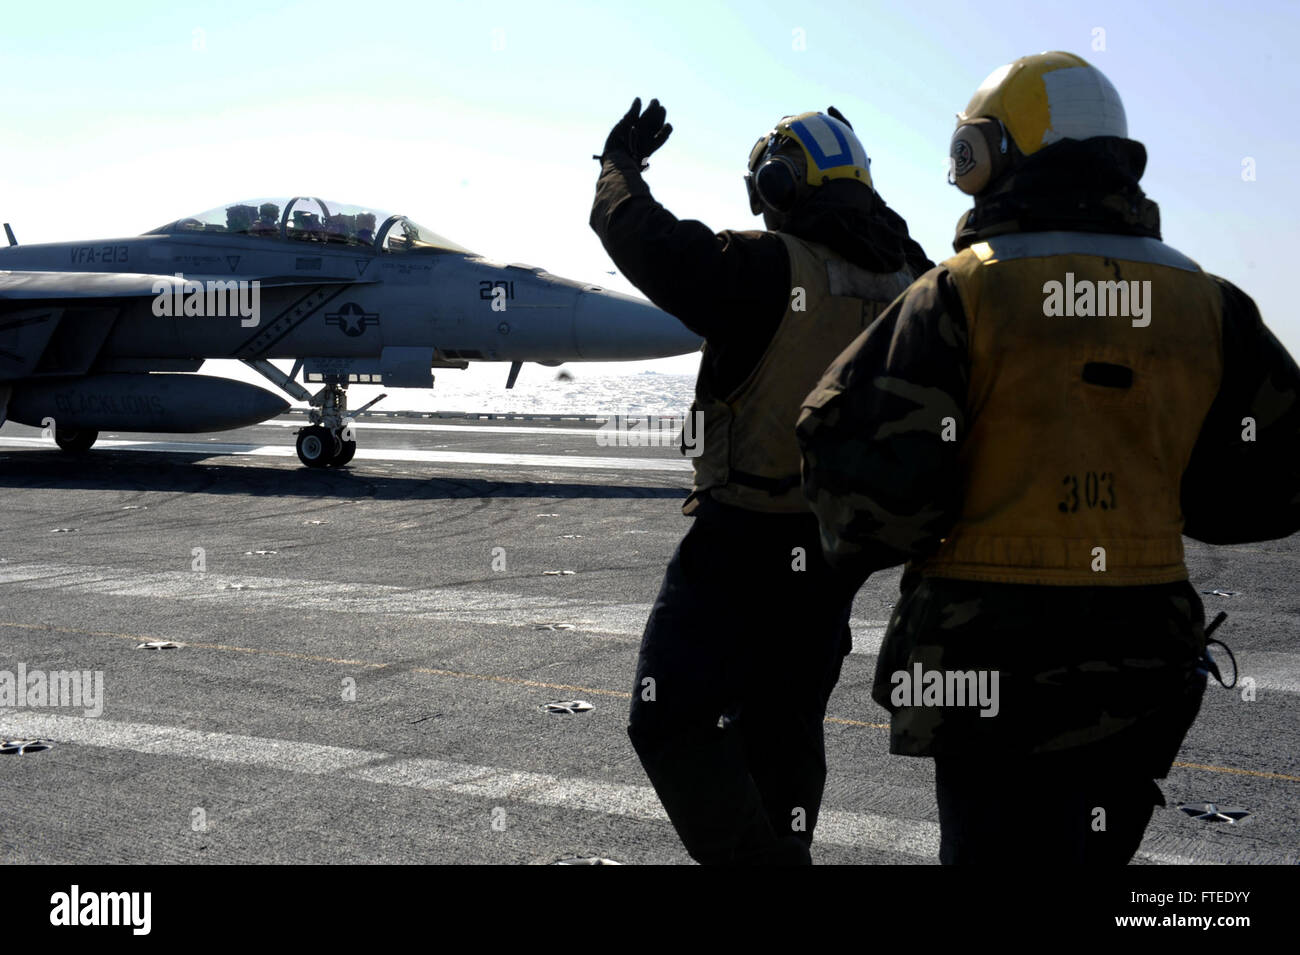 140313-N-EY632-322  MEDITERRENEAN SEA (March 13, 2014) - Sailors on board the aircraft carrier USS George H.W. Bush (CVN 77) direct an F/A-18F Super Hornet, attached to the &quot;Valions,&quot; of Strike Fighter Squadron (VFA) 213, on the flight deck. George H. W. Bush is on a scheduled deployment supporting maritime security operations and theater security cooperation efforts in the U.S. 6th Fleet area of operations. (U.S. Navy photo by Mass Communication Specialist 2nd Class Joshua K. Horton/Released)  Join the conversation on Twitter ( https://twitter.com/naveur navaf )  follow us on Facebo Stock Photo